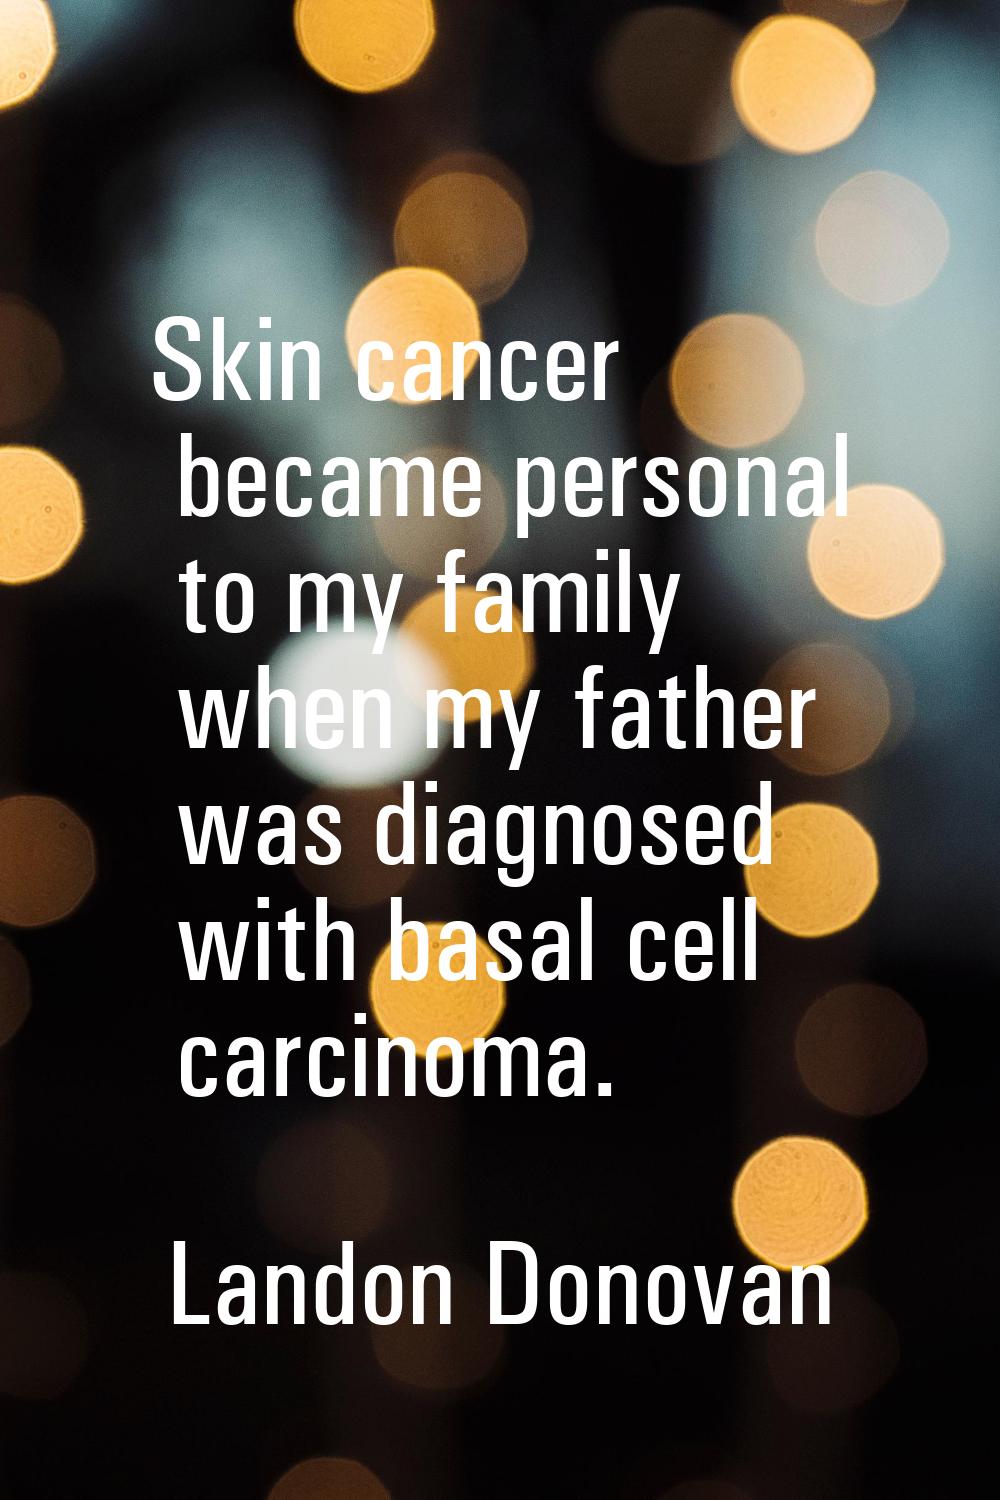 Skin cancer became personal to my family when my father was diagnosed with basal cell carcinoma.